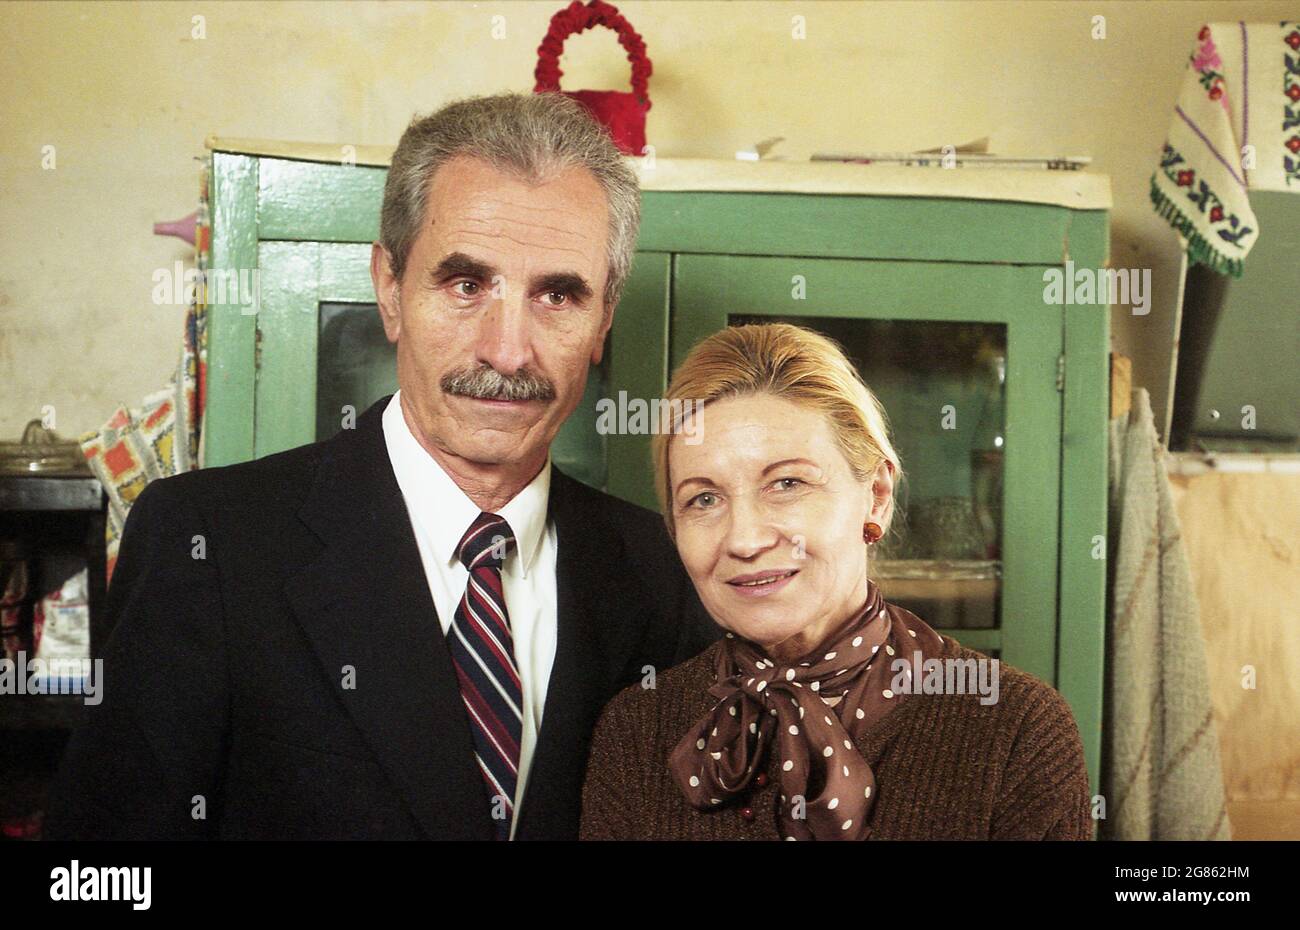 Romania, 2001. Actors Remus Mărgineanu & Lucia Mureșan during the shooting of the movie 'Report on the State of the Nation' (director Ioan Carmazan). Stock Photo